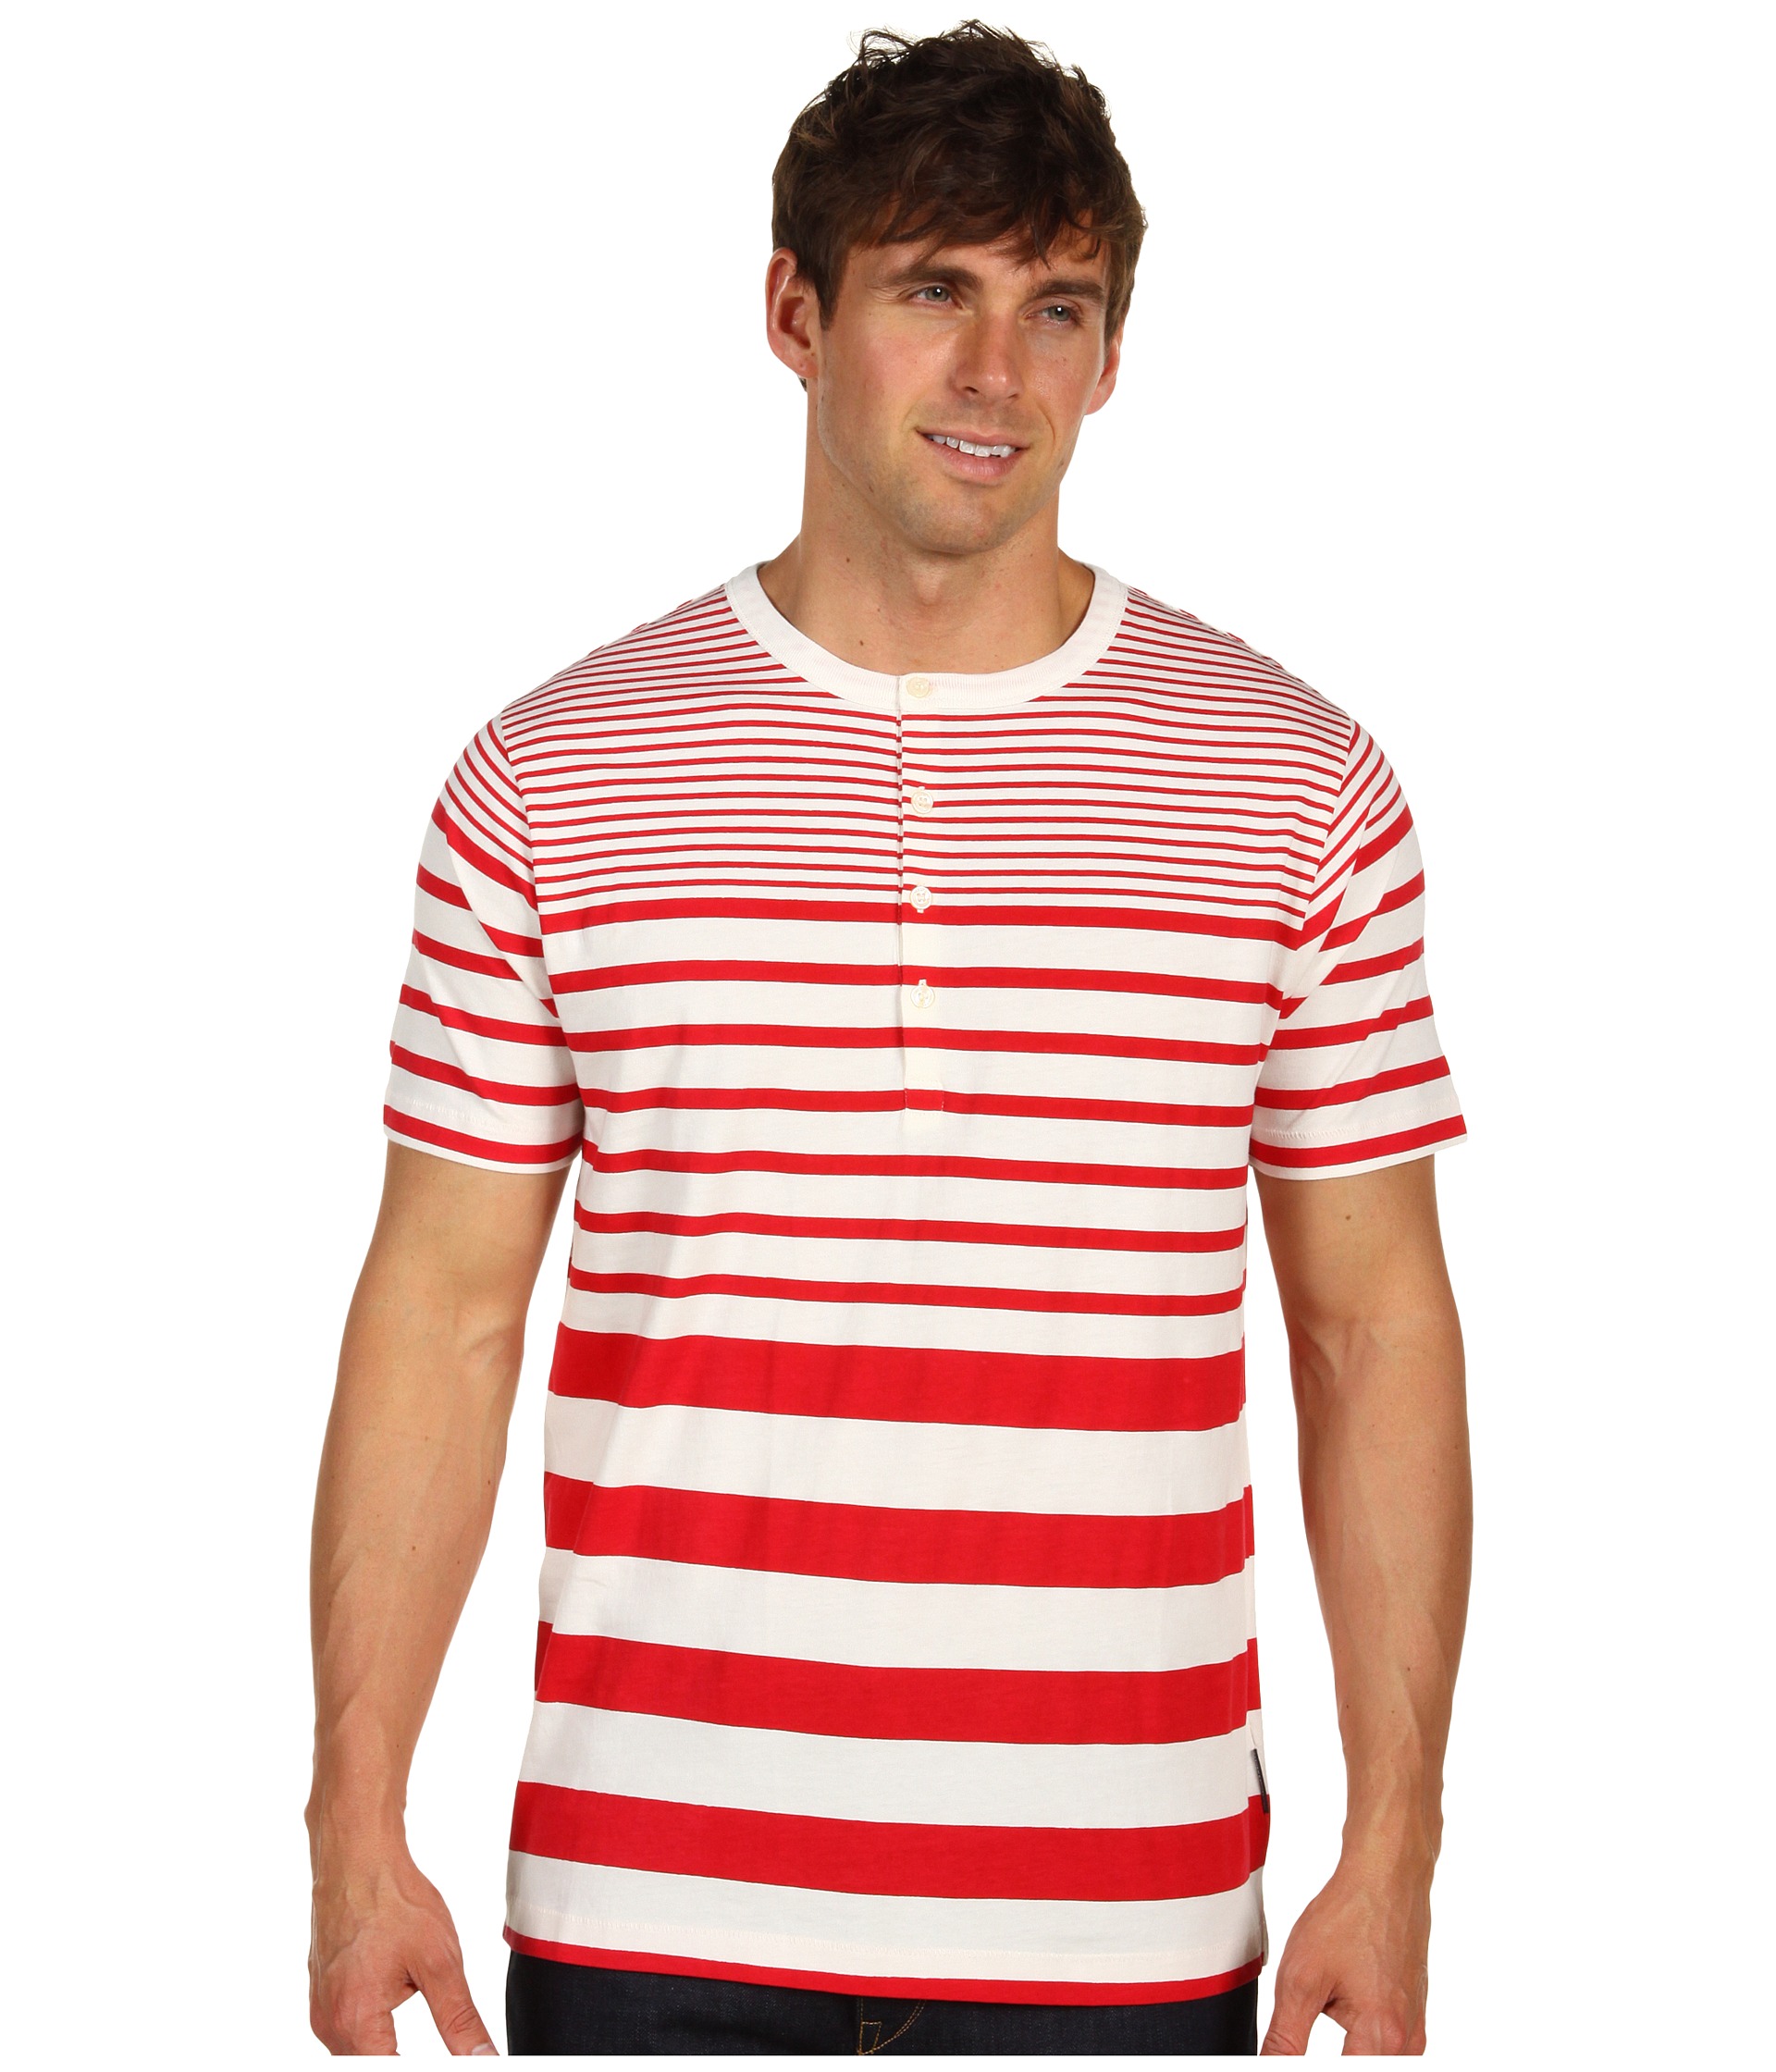 French Connection High Jump Stripe Henley $38.99 $48.00 SALE